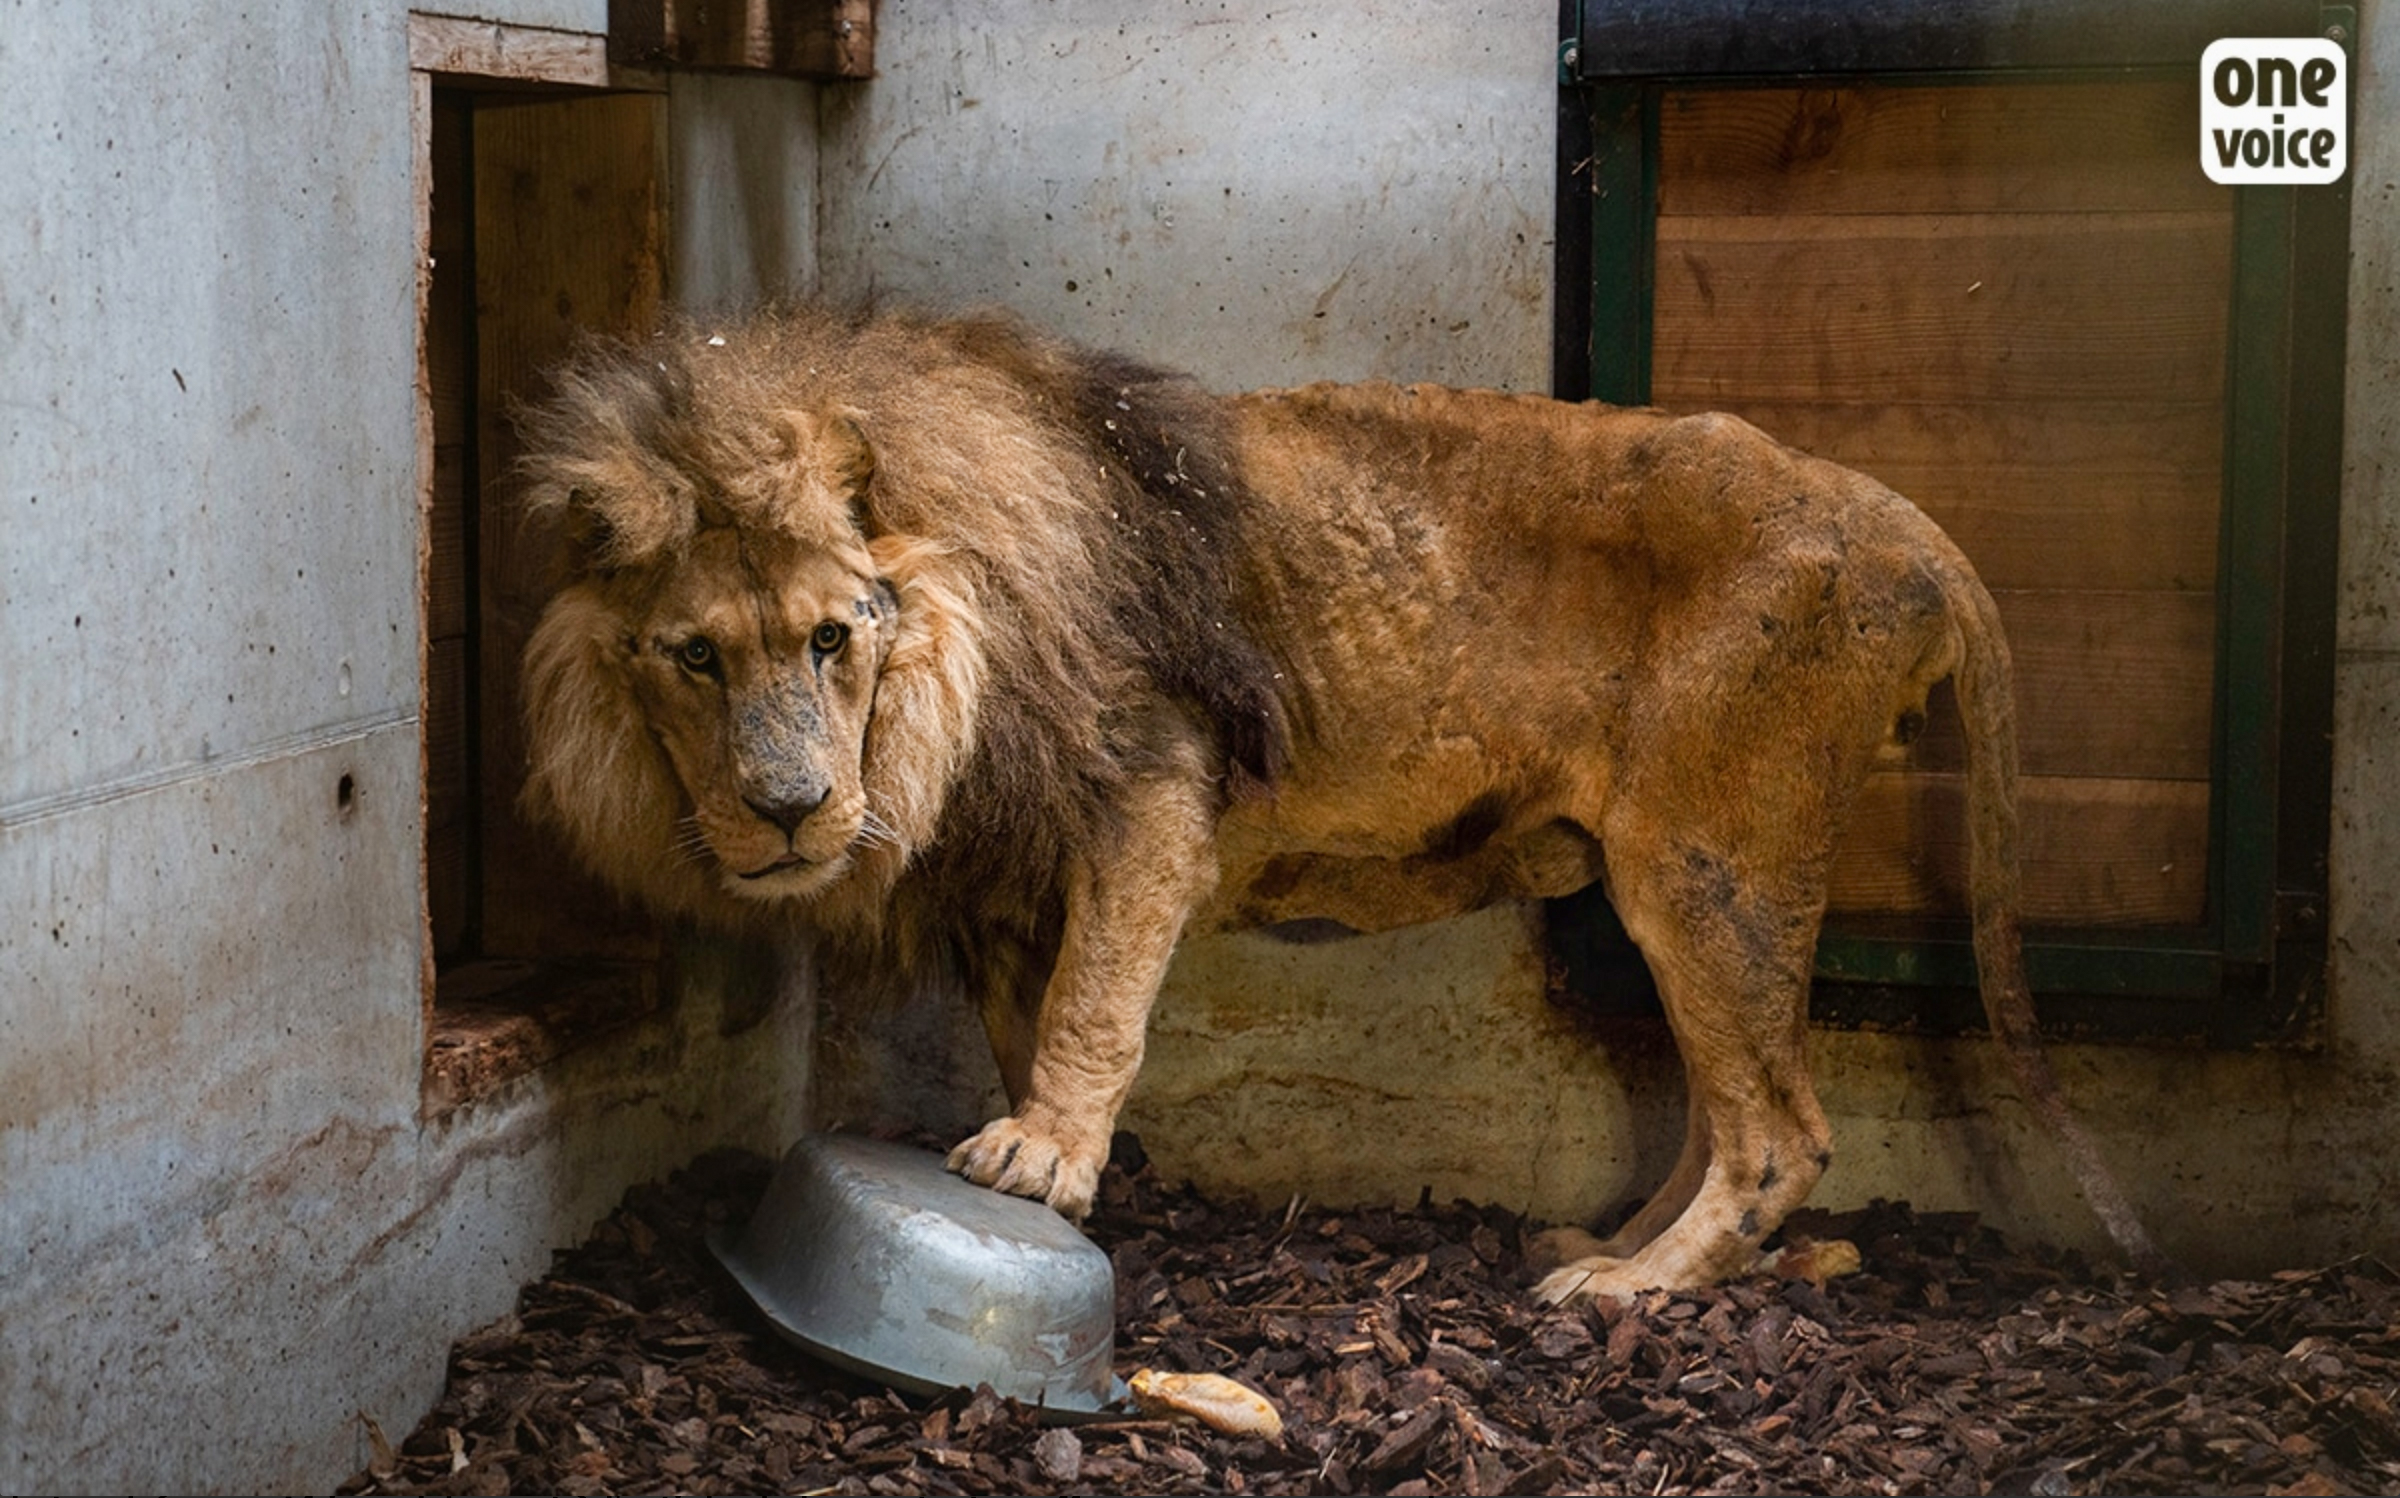 f-eed-from-their-captivity-in-a-circus-the-lions-have-been-released-into-the-safety-of-a-nature